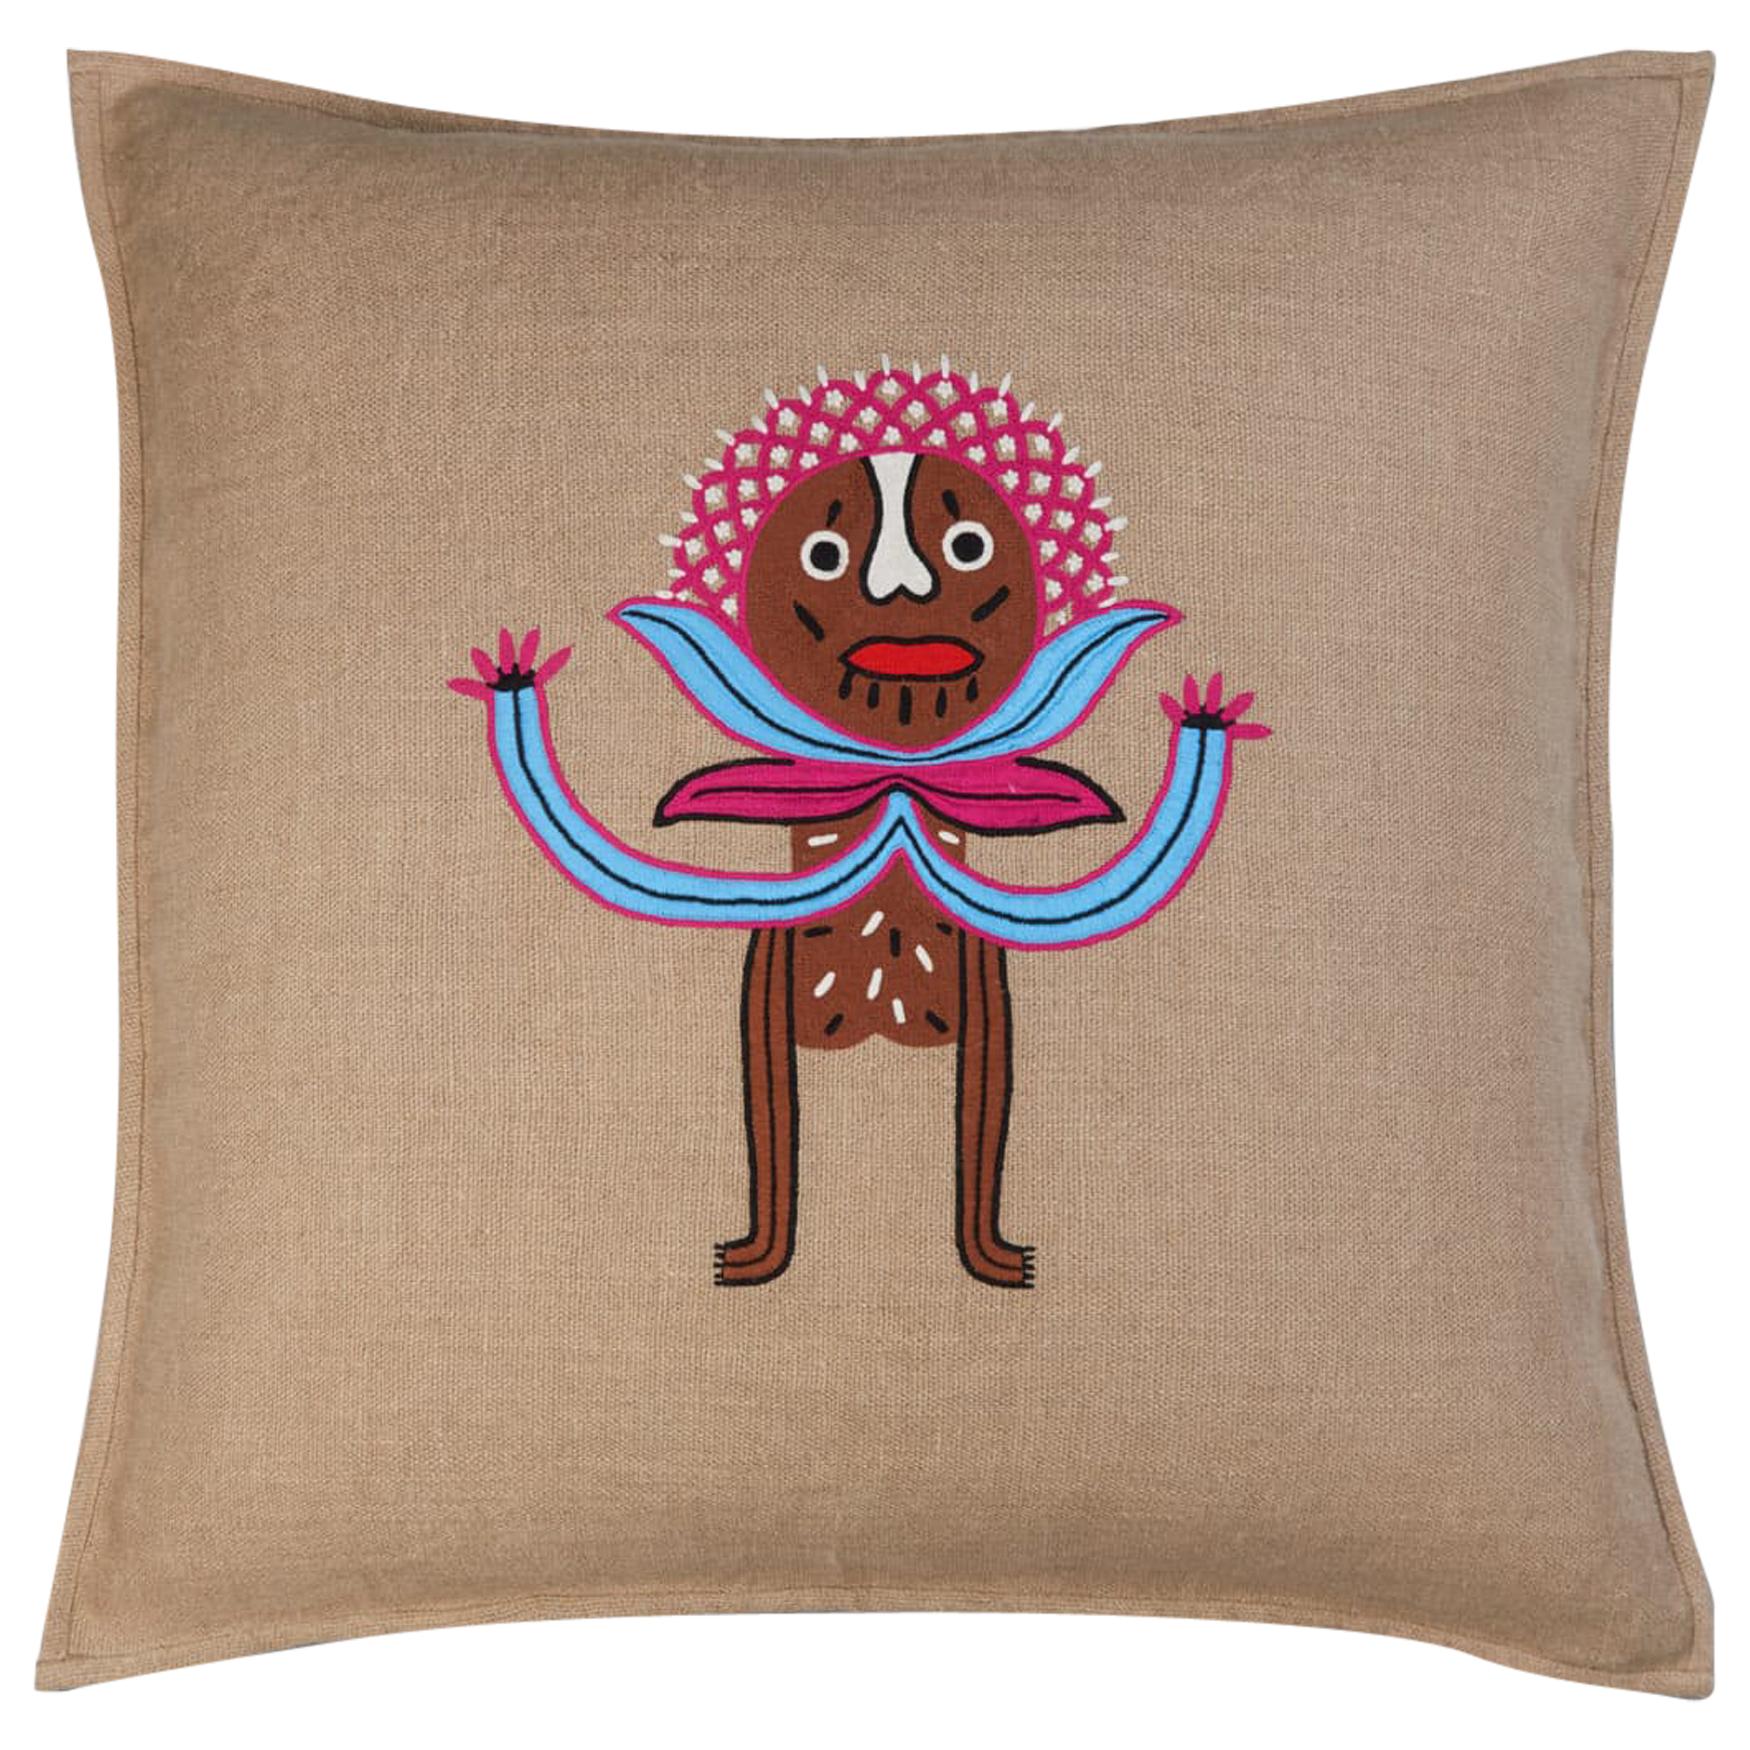 Umai Hand Embroidered Beige Linen Pillow Cover